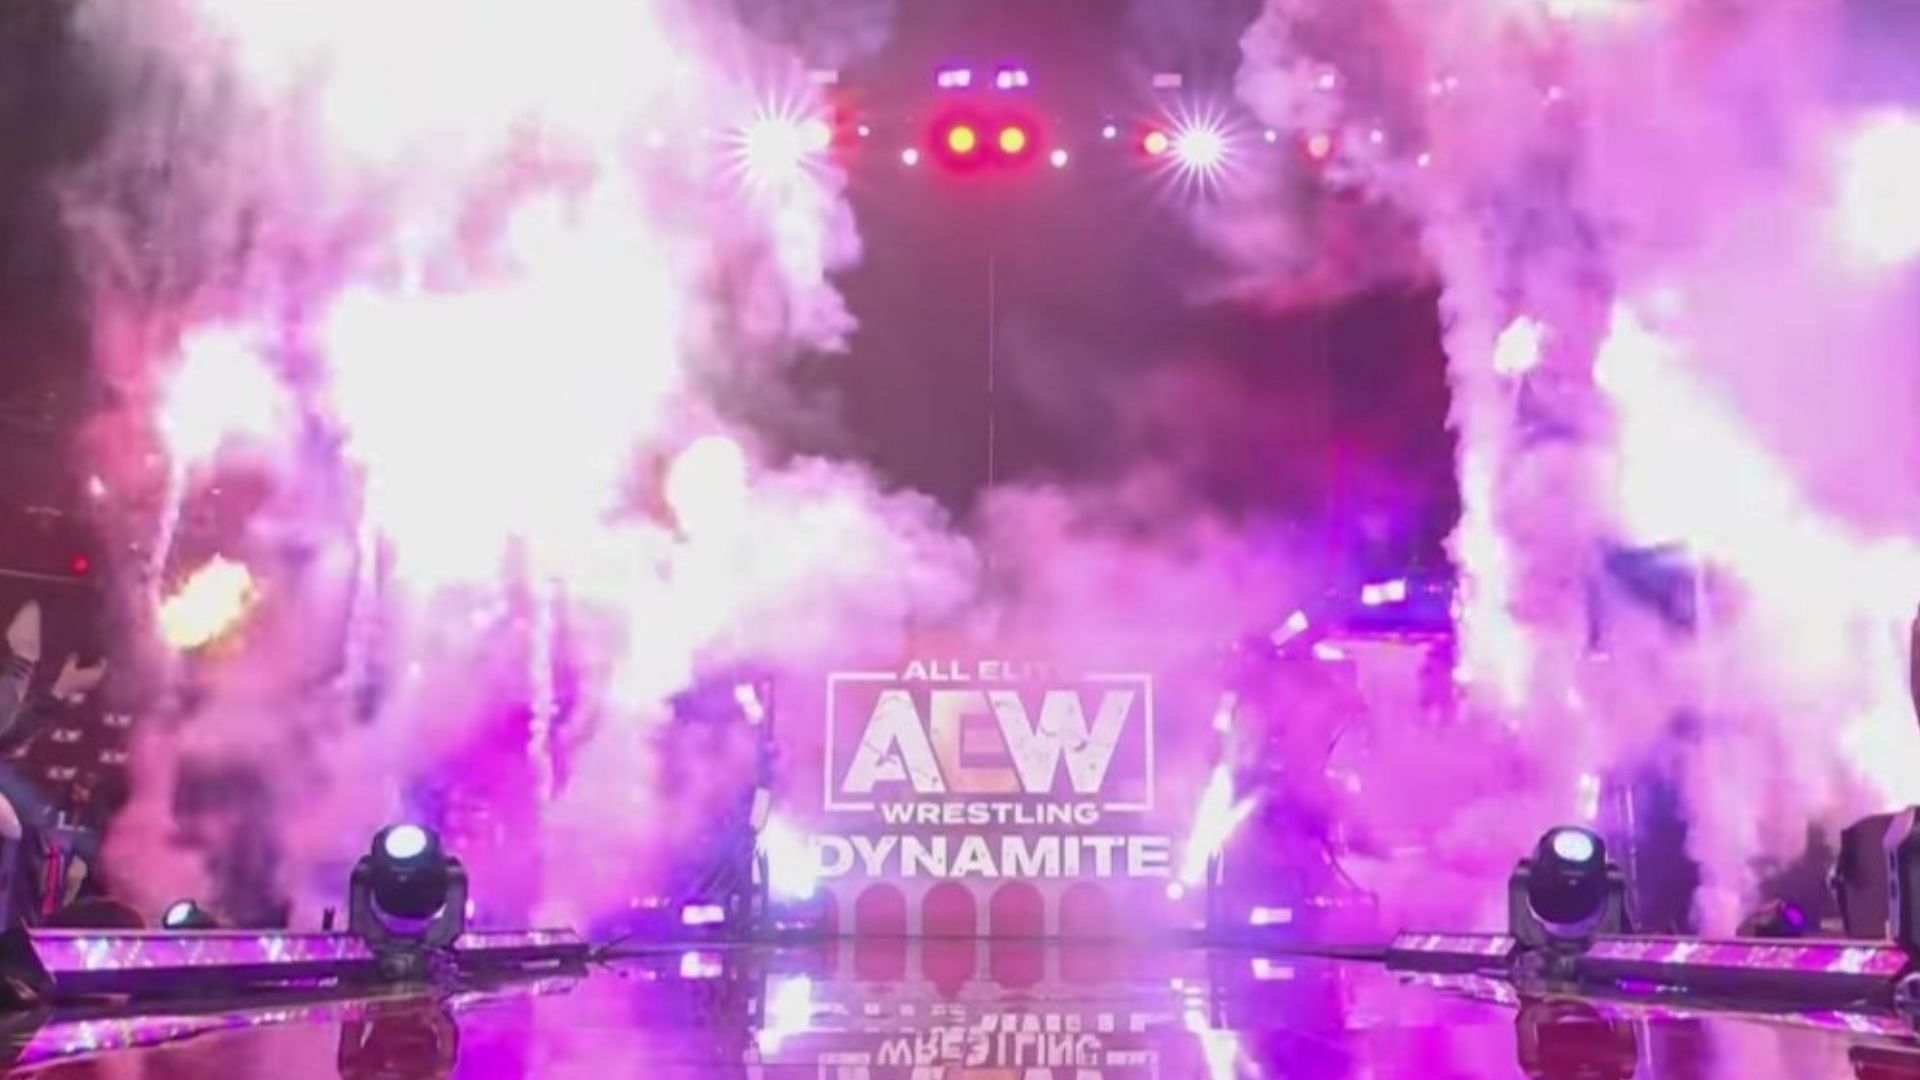 Dynamite featured a special stage design as they made their California debut